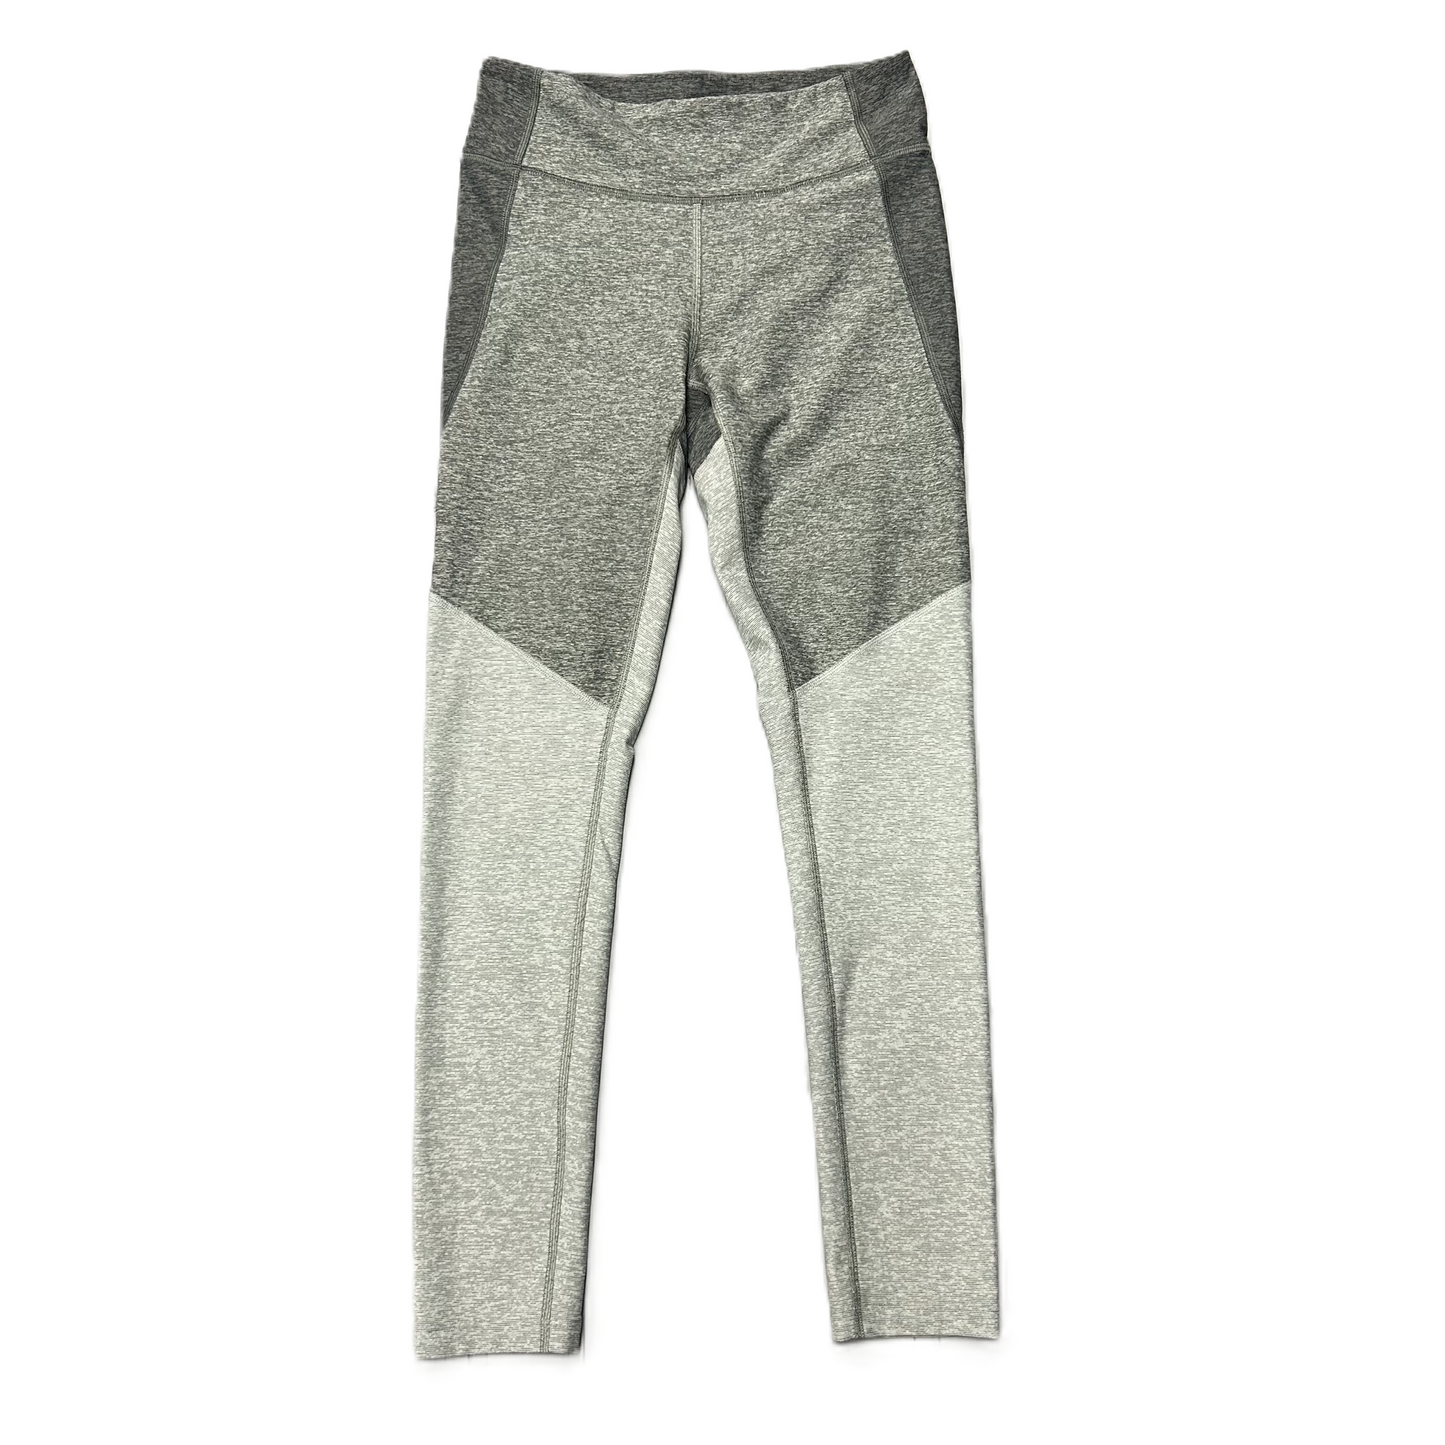 Grey Athletic Leggings By Outdoor Voices, Size: S